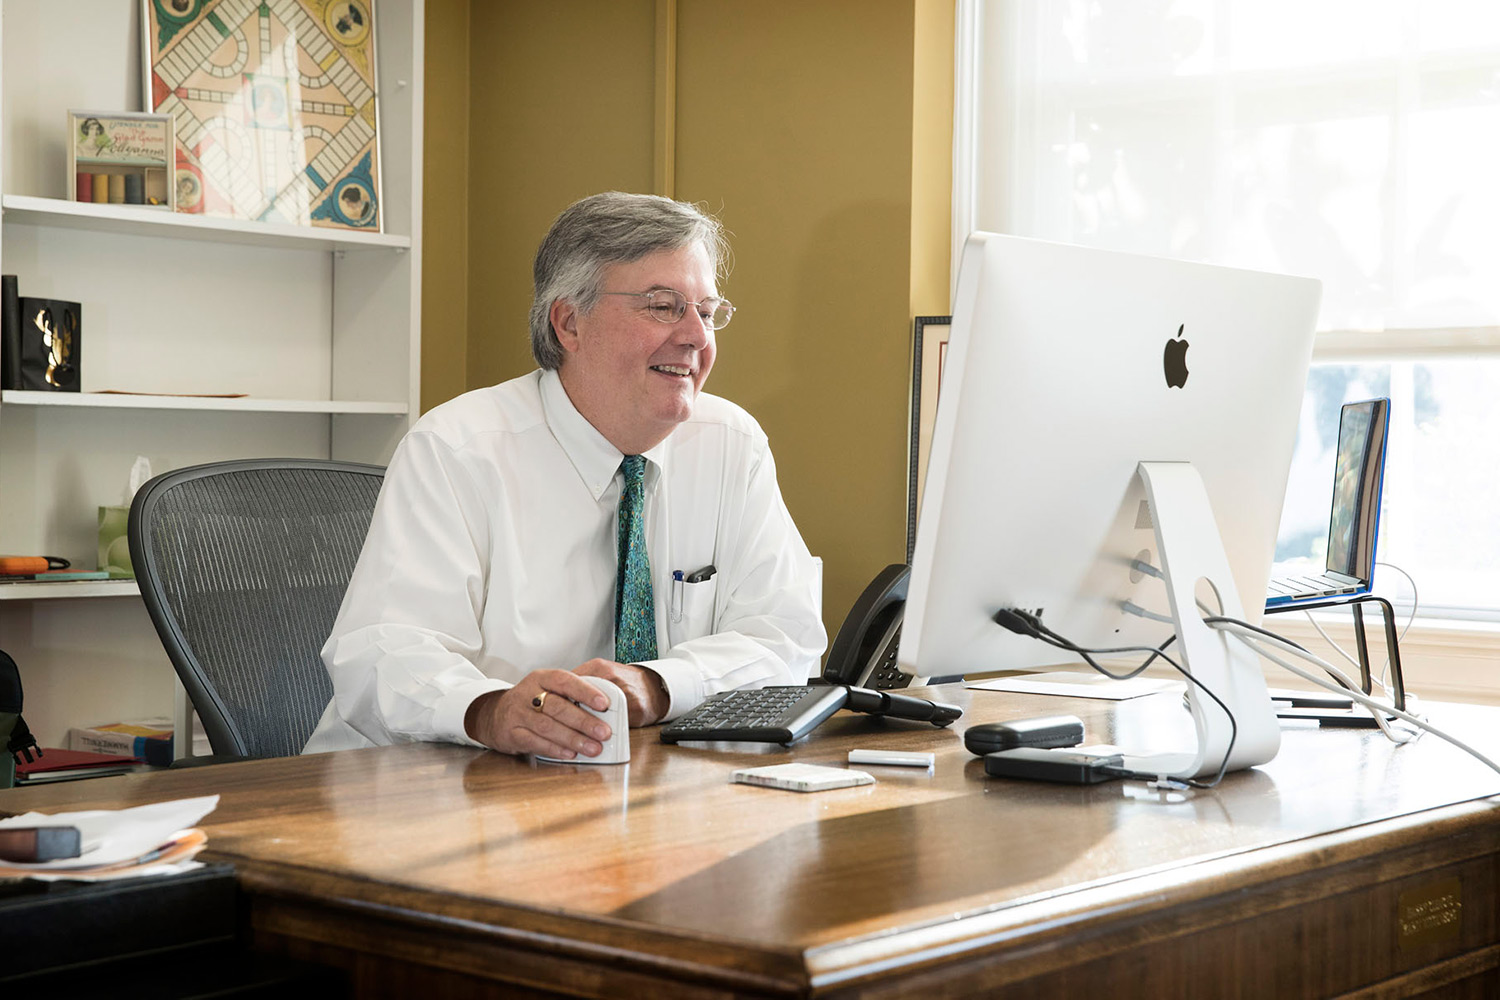 John Unsworth began his tenure as the new university librarian and dean of libraries in June.